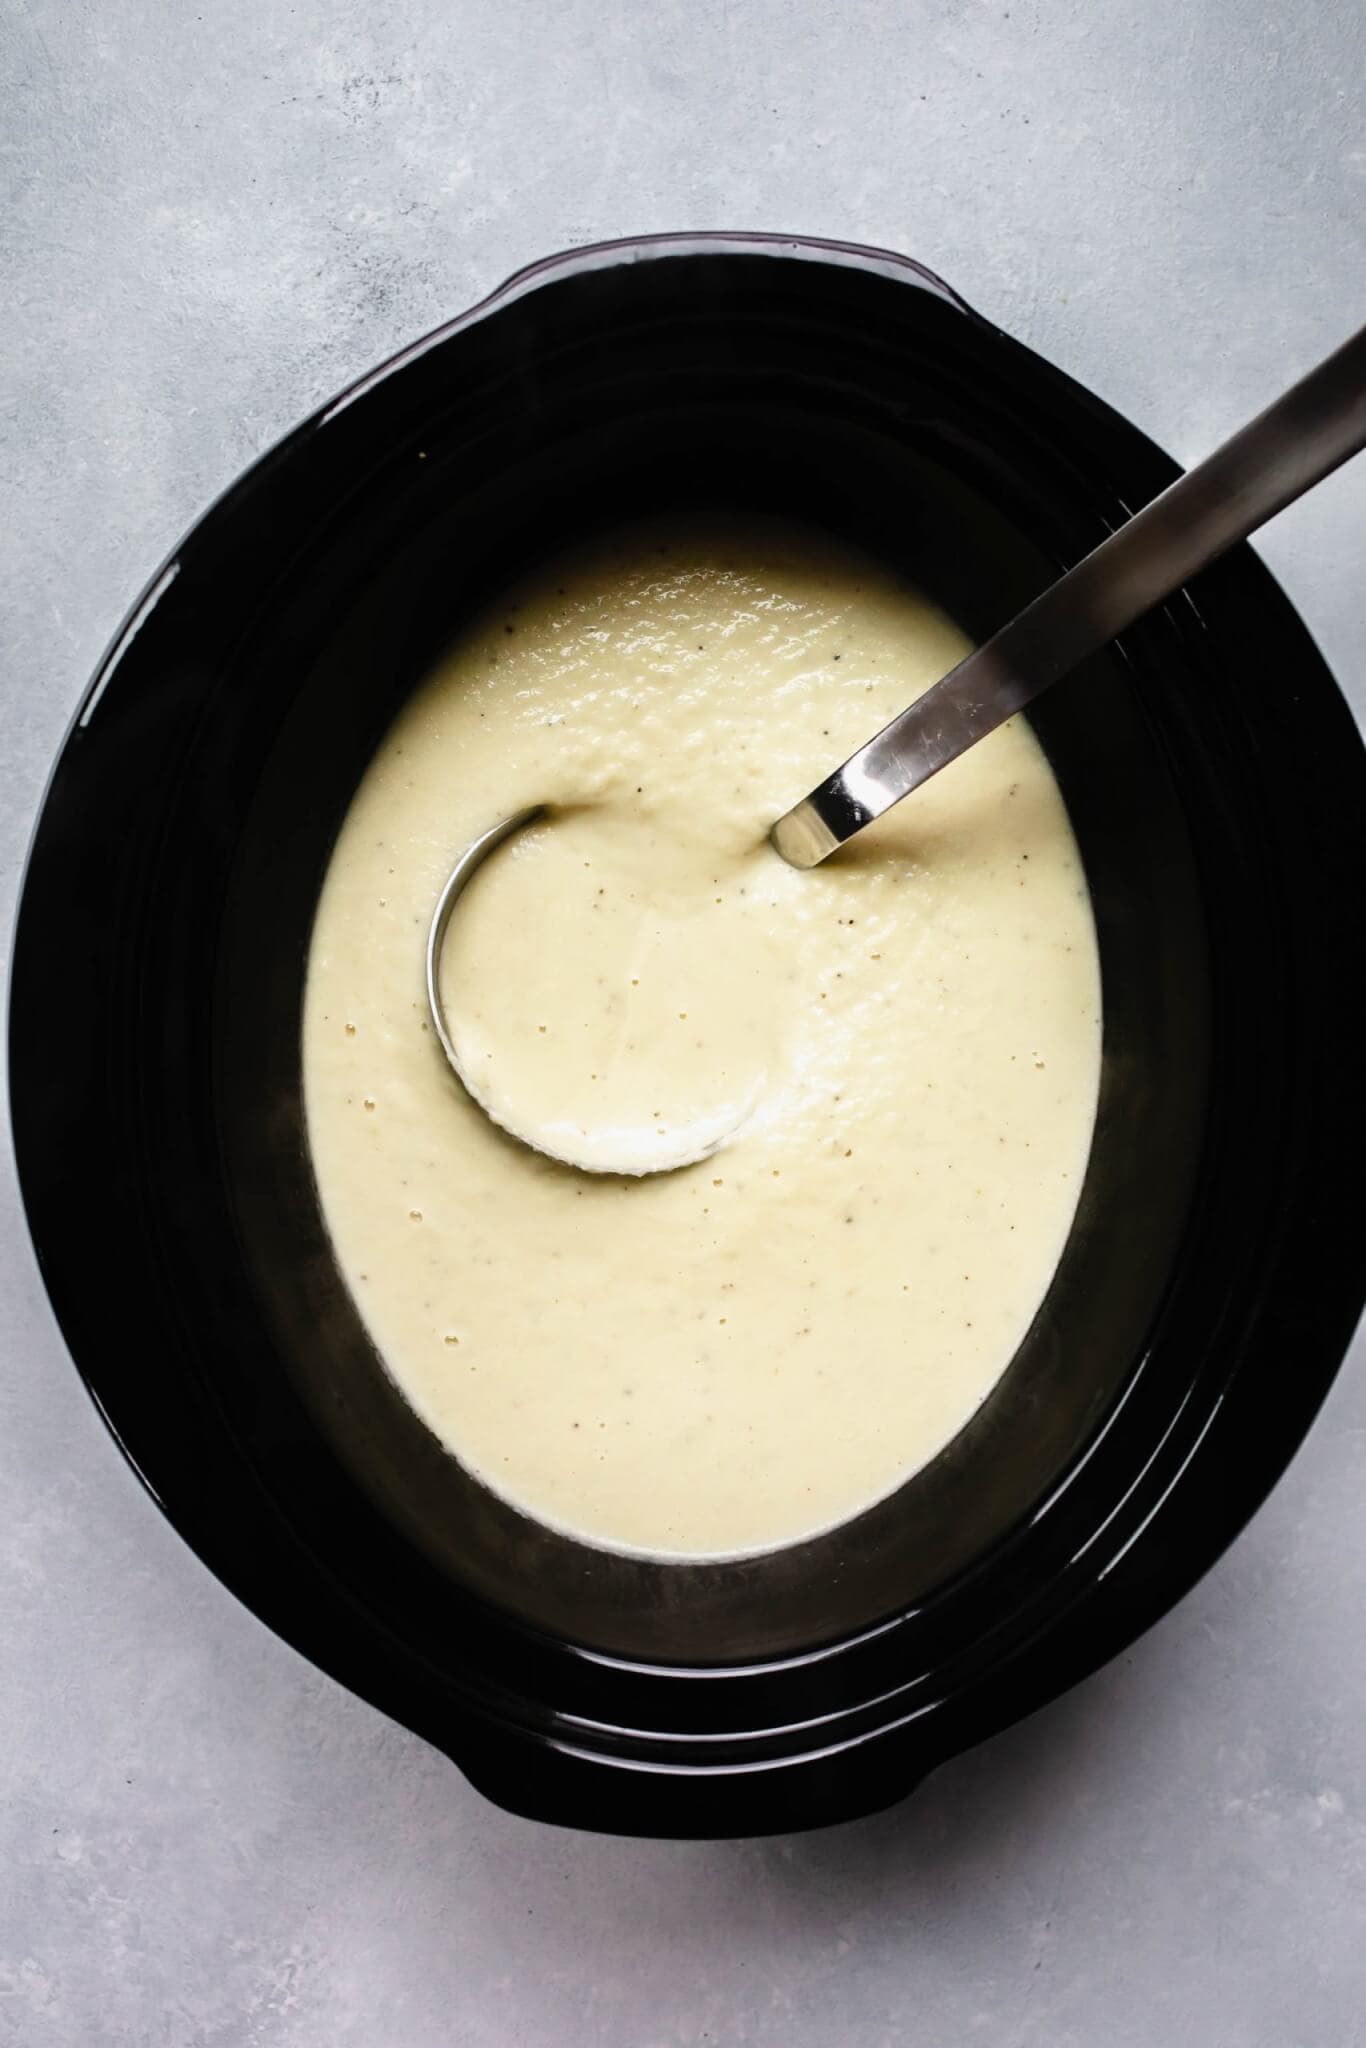 Ladle in crockpot with cauliflower soup.